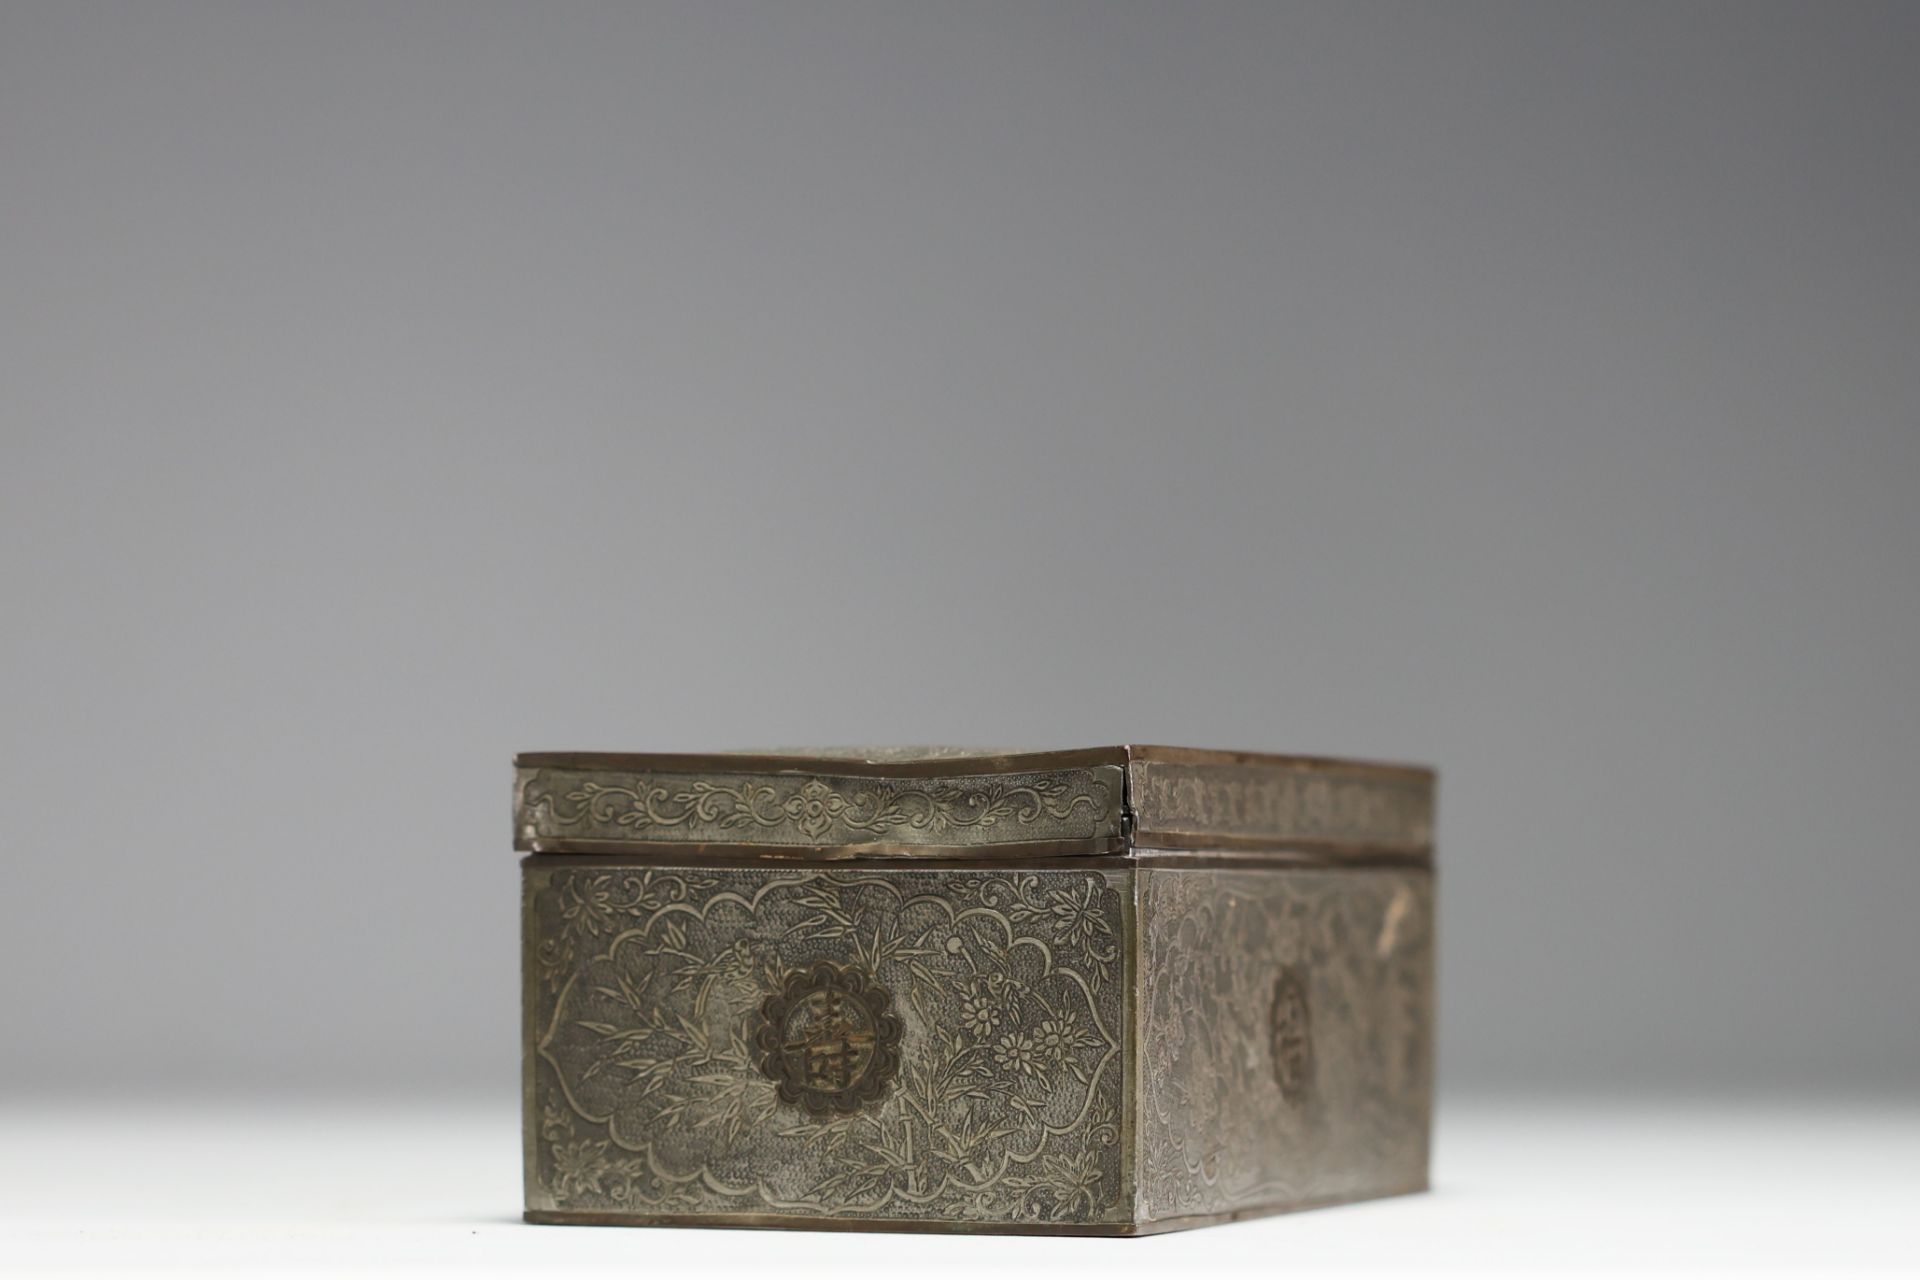 China - Pewter and copper tobacco drying case with dragon decoration, late 19th century. - Image 2 of 4